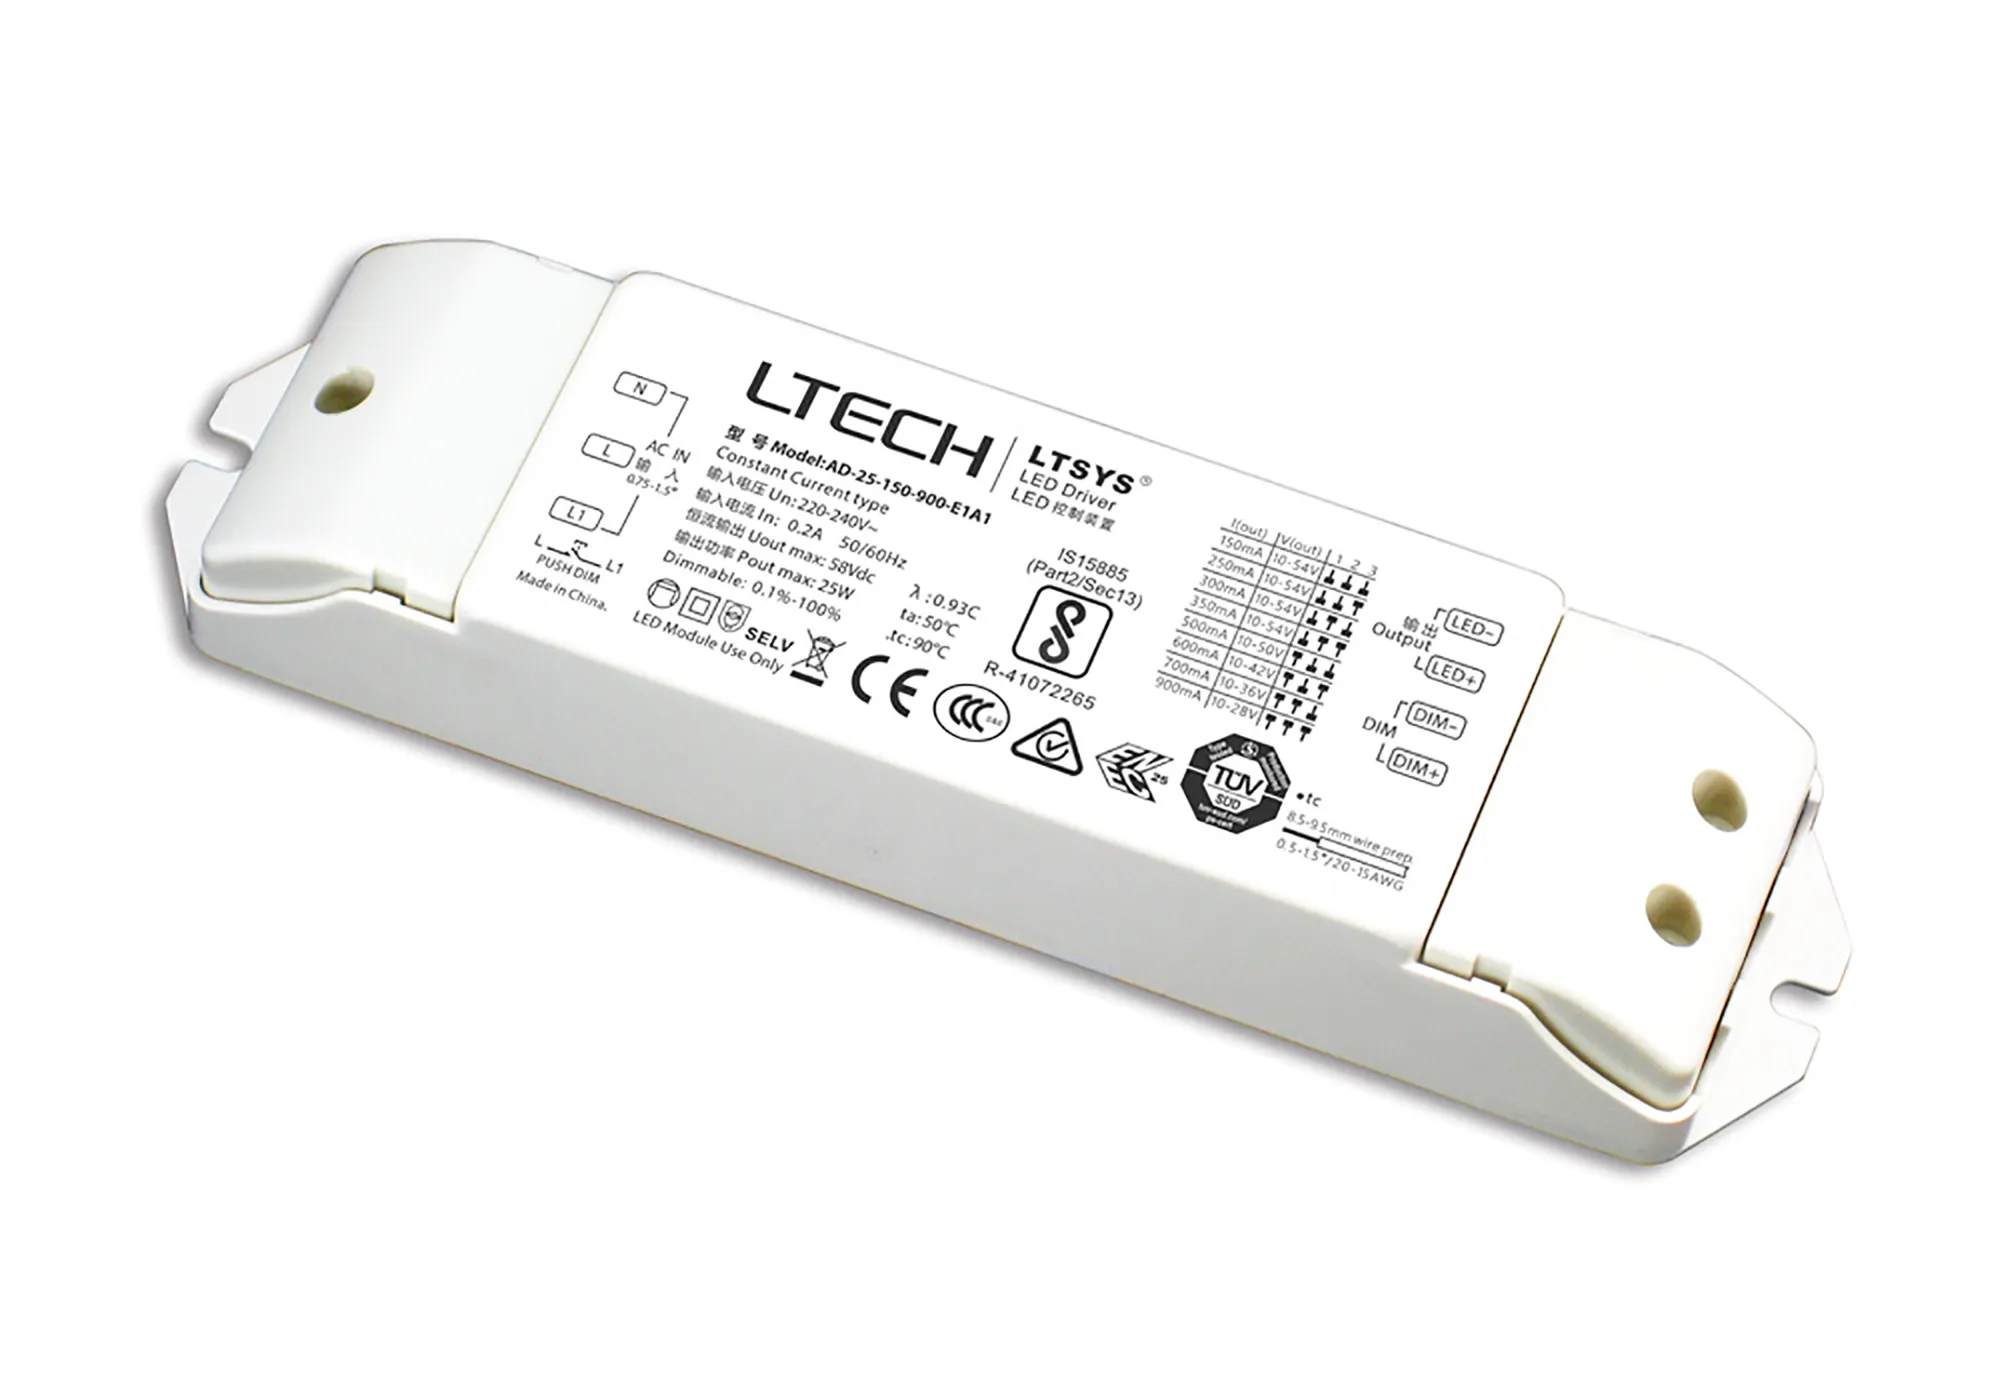 AD-25-150-900-E1A1  PWM Push Dim 1.5-25W Current Dimmable Driver